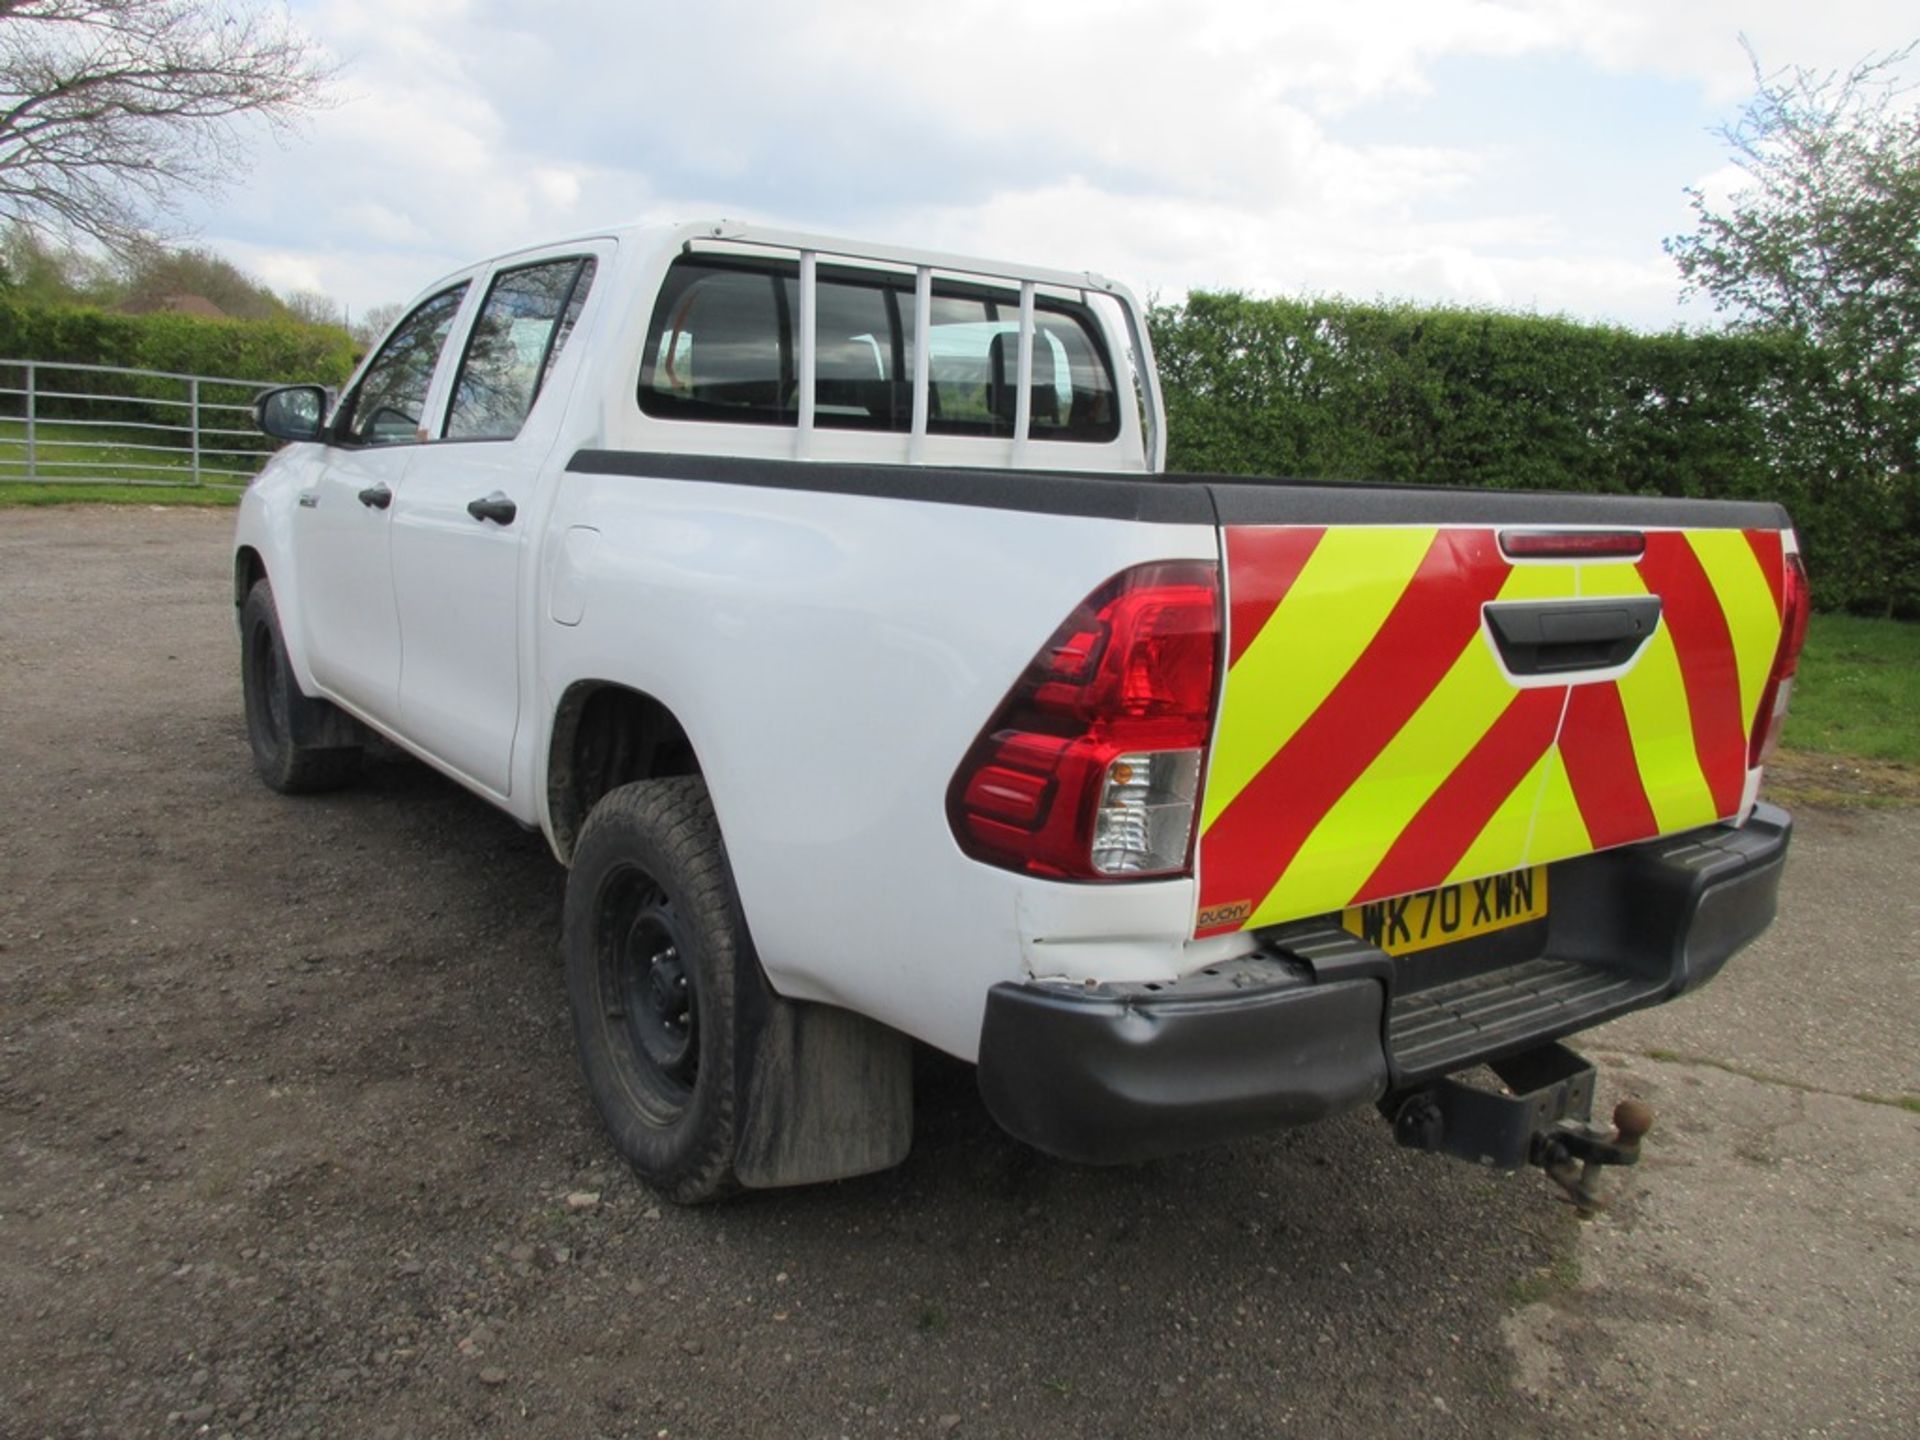 Toyota Hilux Active 2.4D-4D 4Wd Double Cab pickup, 147bhp (19/01/2021) - Image 4 of 18